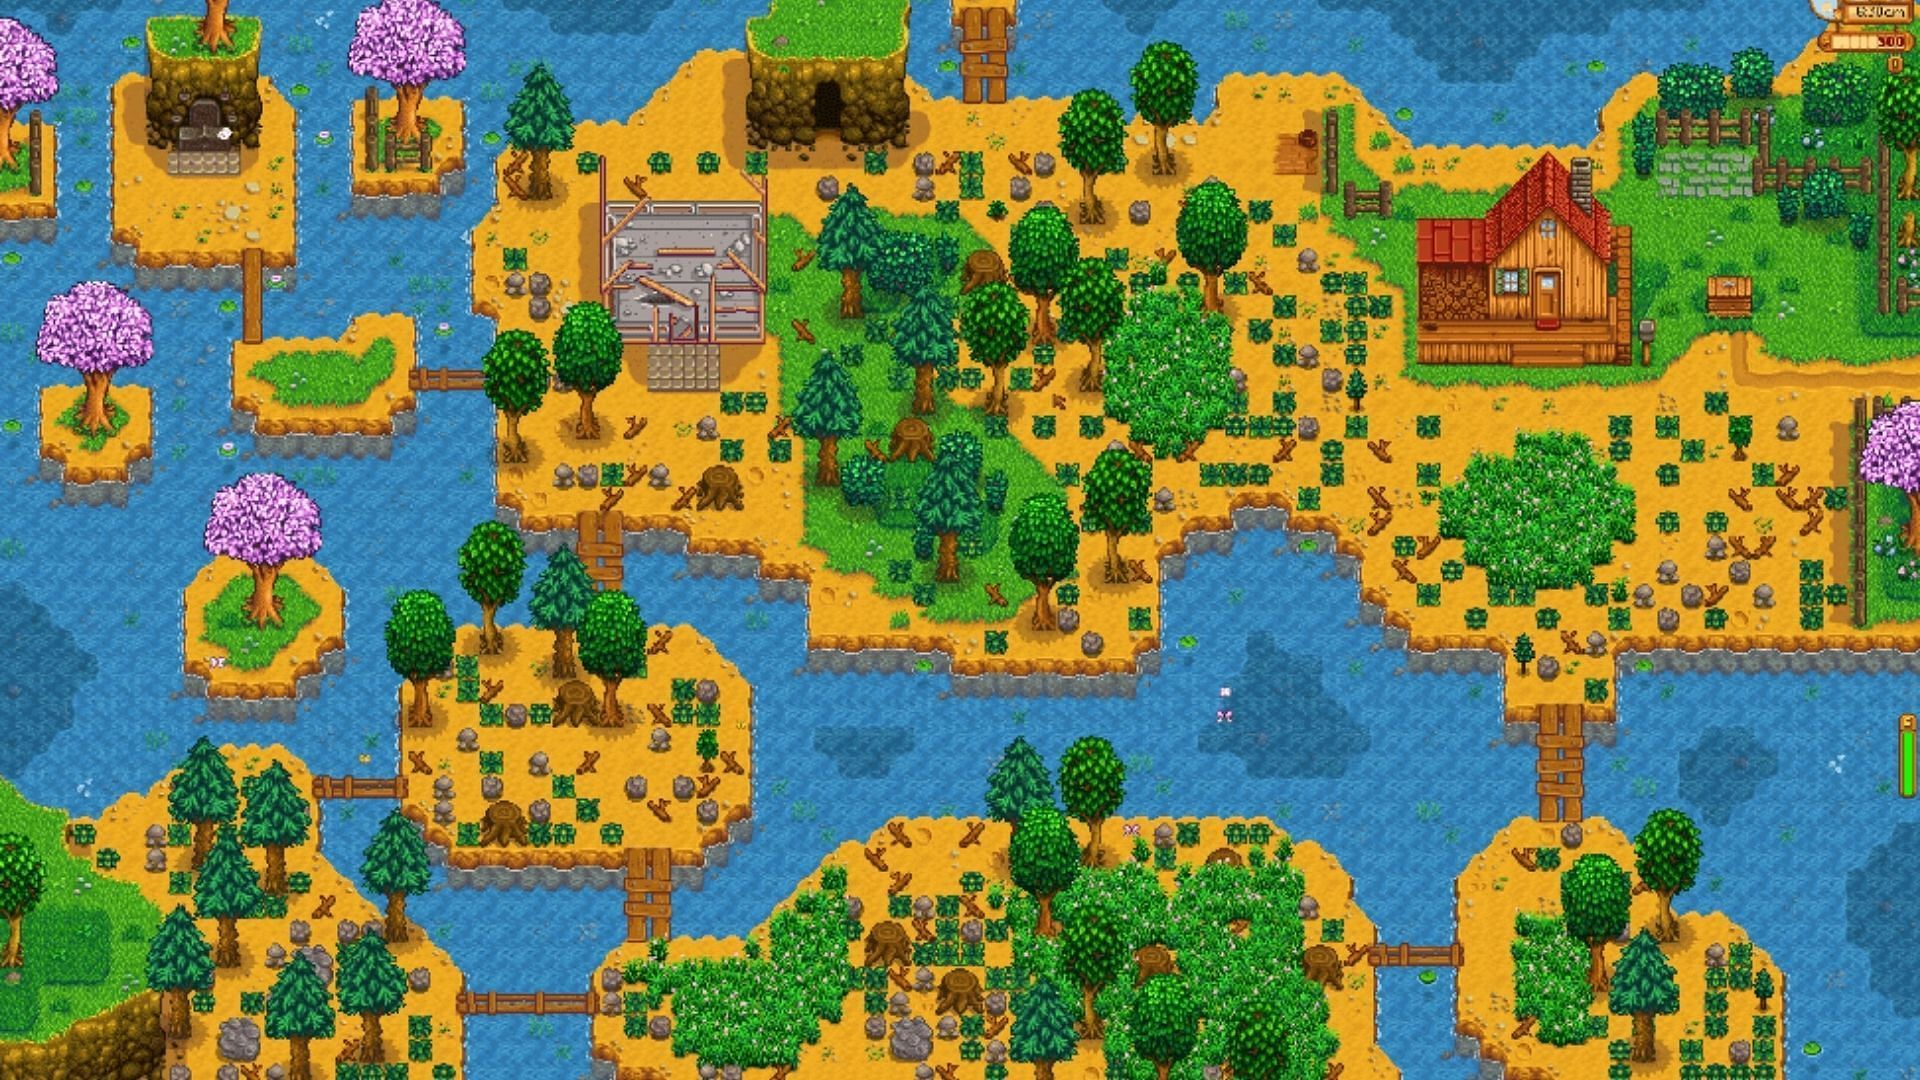 The Riverland Farm is suitable for fishing and offers some rare fish variety. (Image via ConcernedApe)